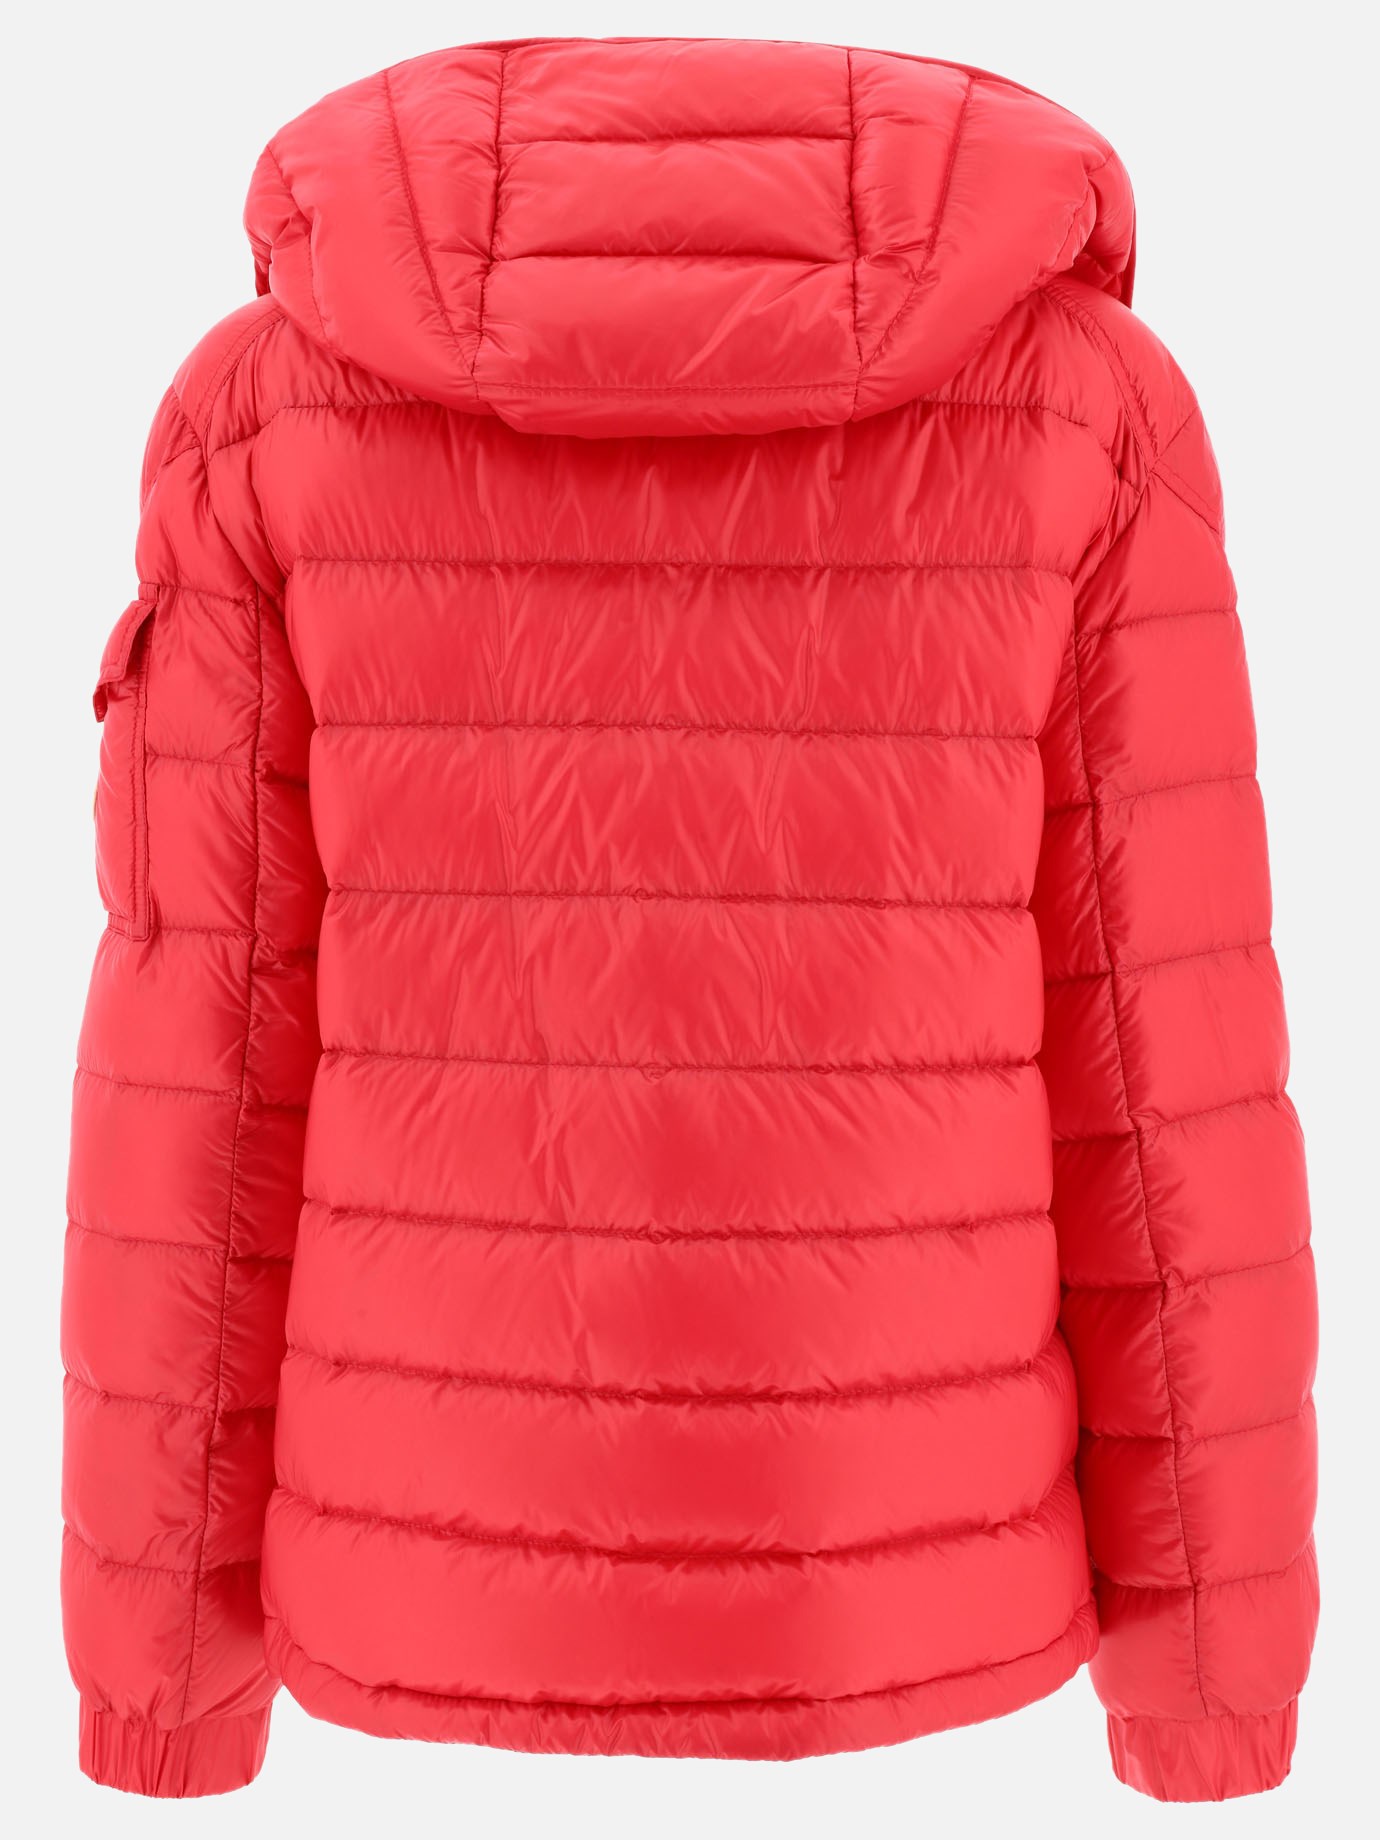  Dalles  down jacket by Moncler